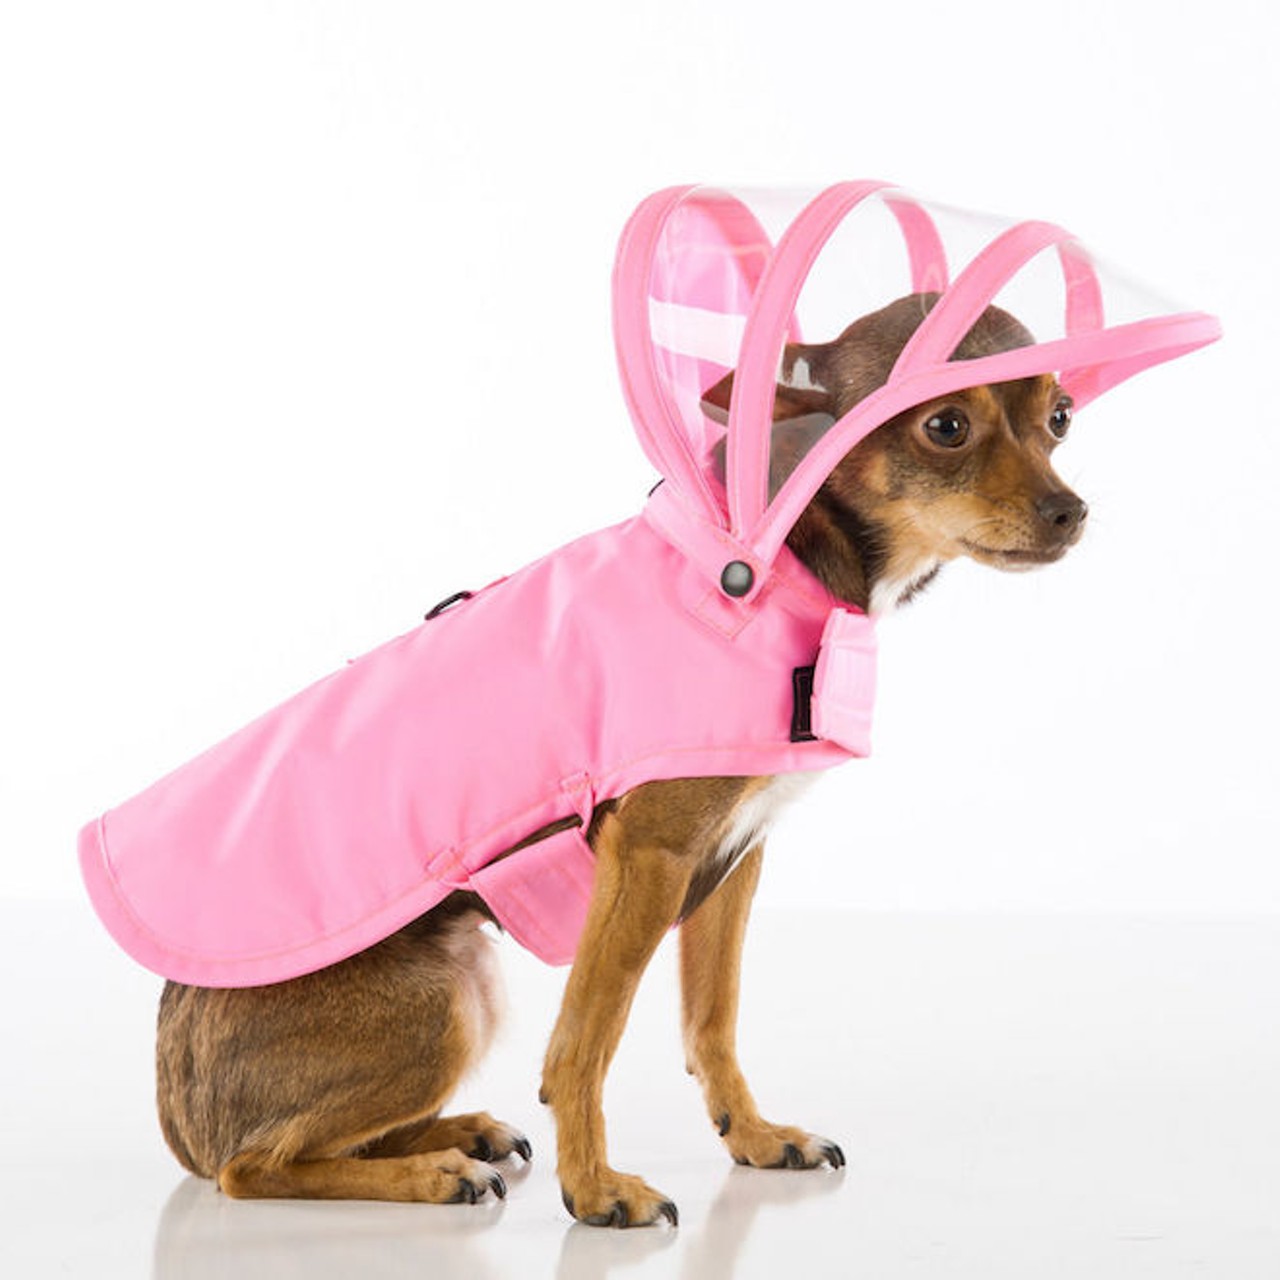 This raincoat for dogs with a see-through hood.